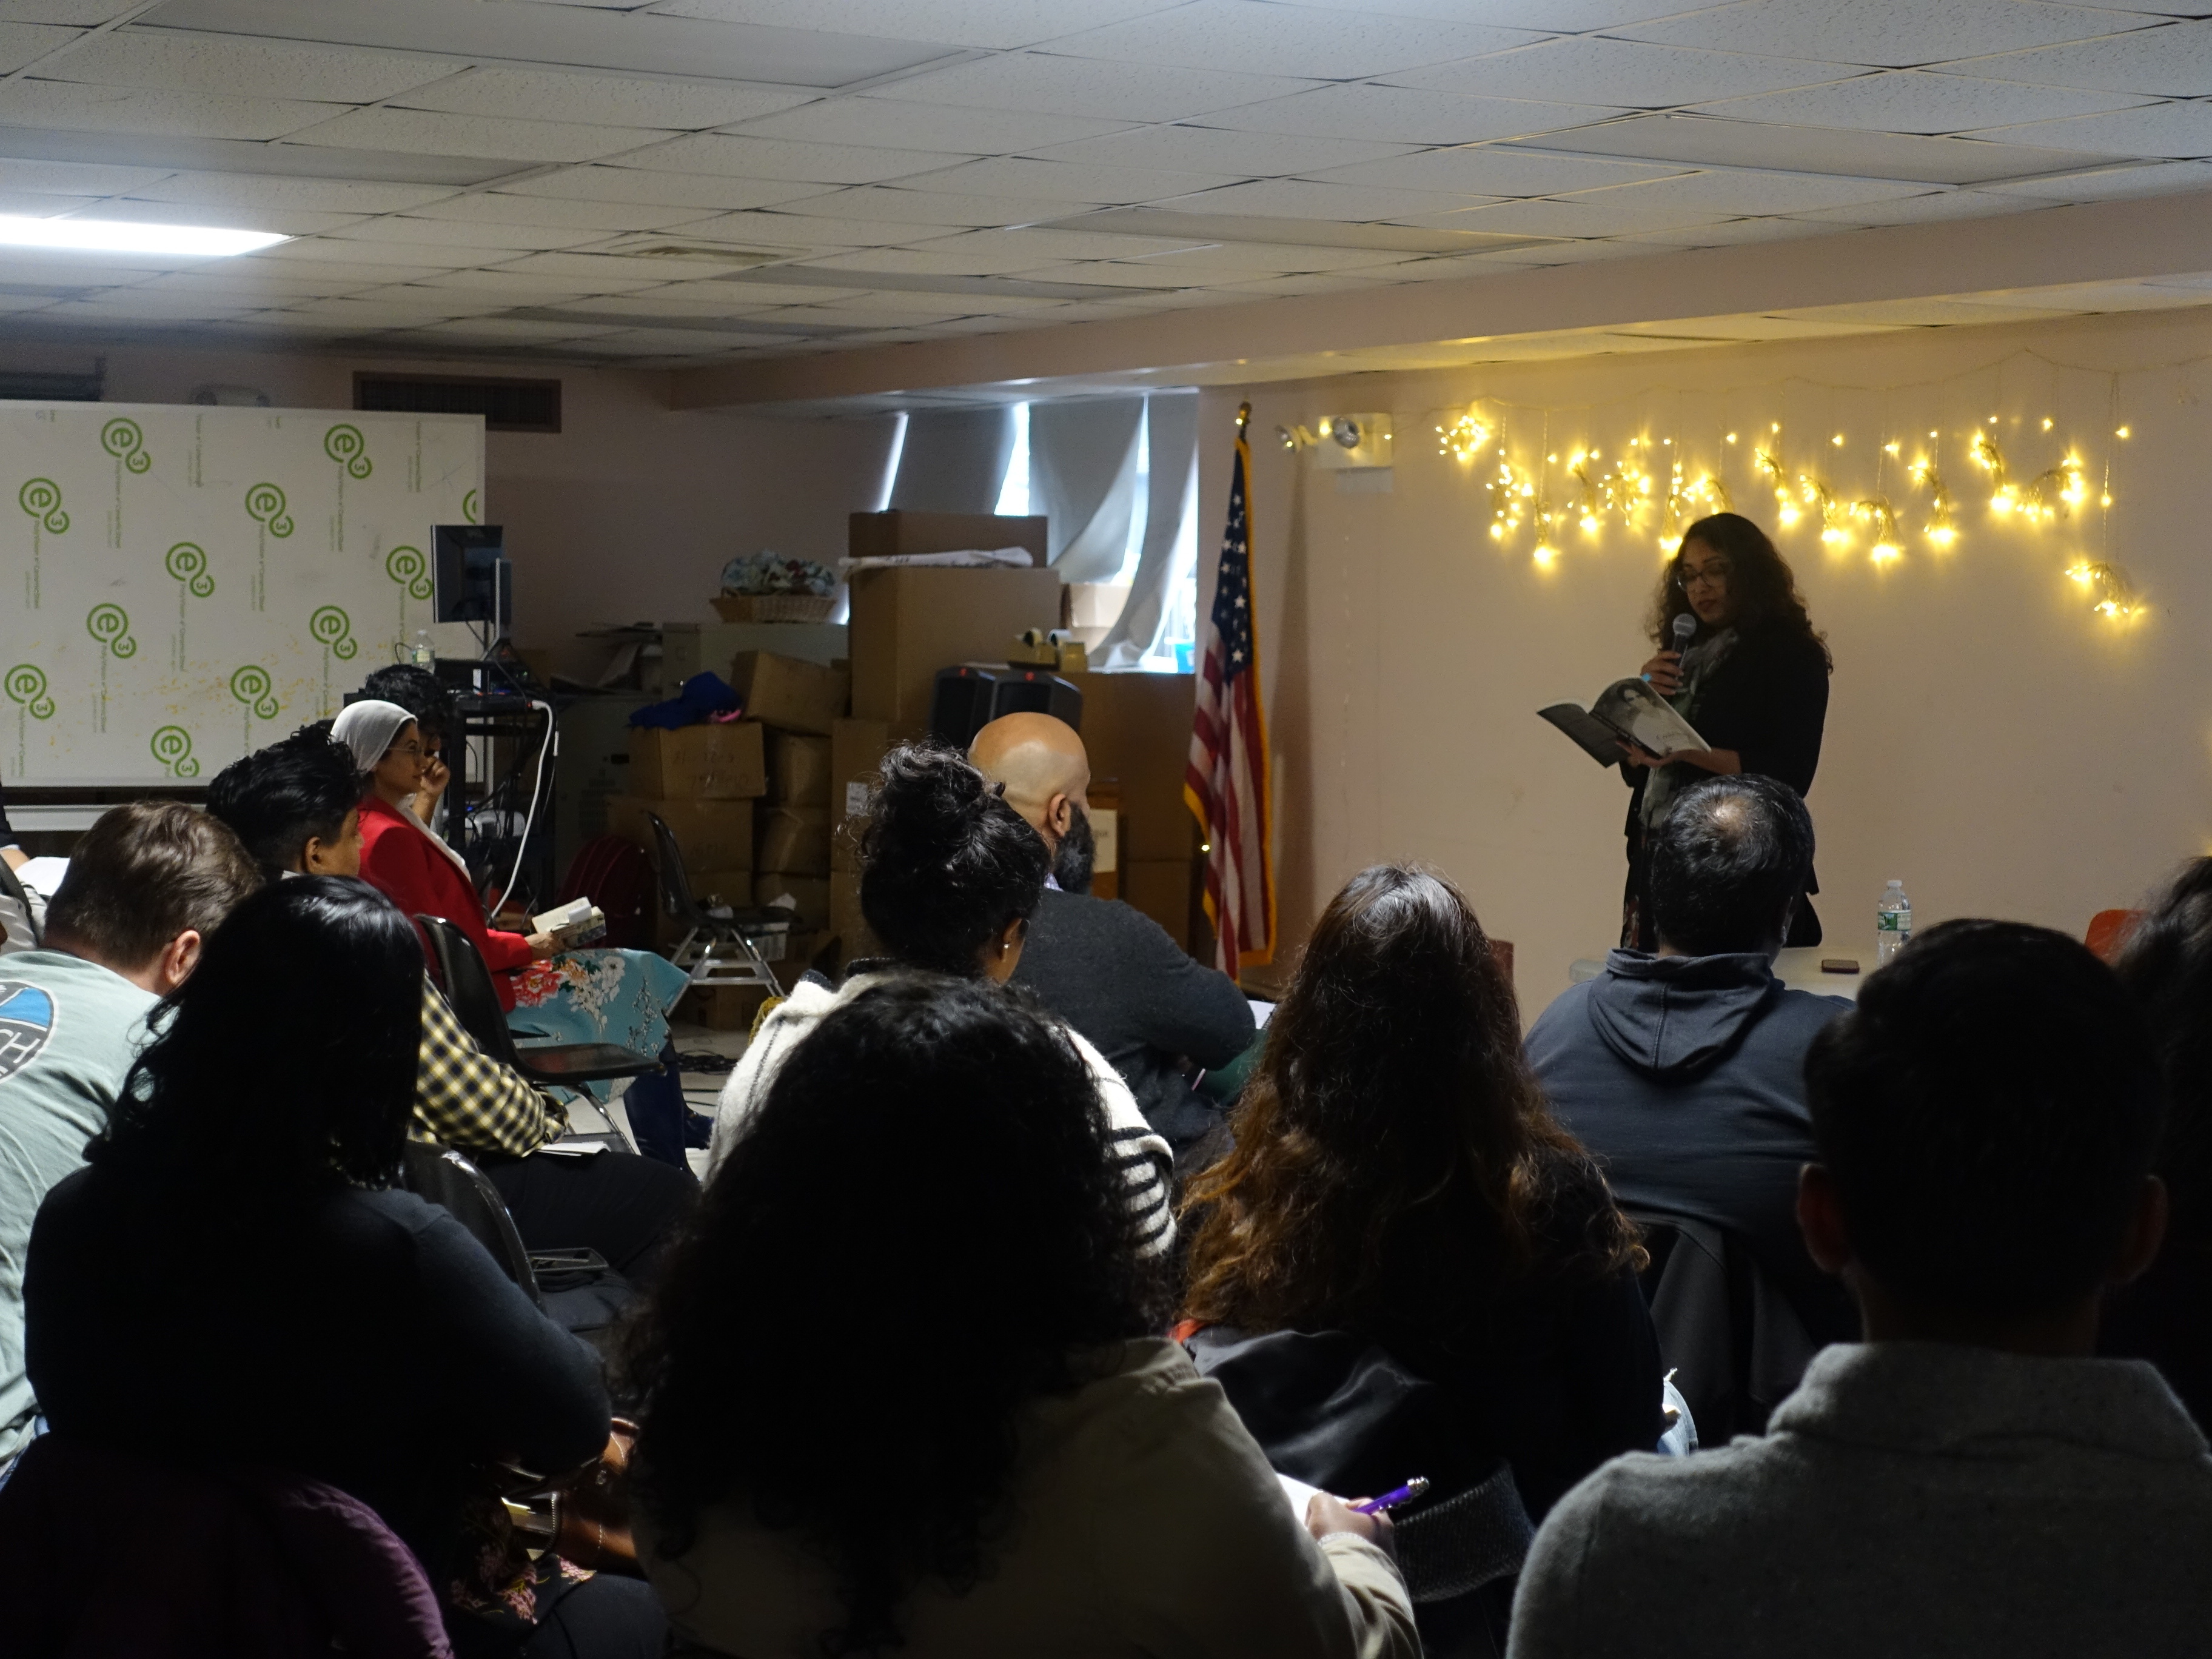 Gaiutra reads from a book, in front of an audience. Behind her is a string of lights.